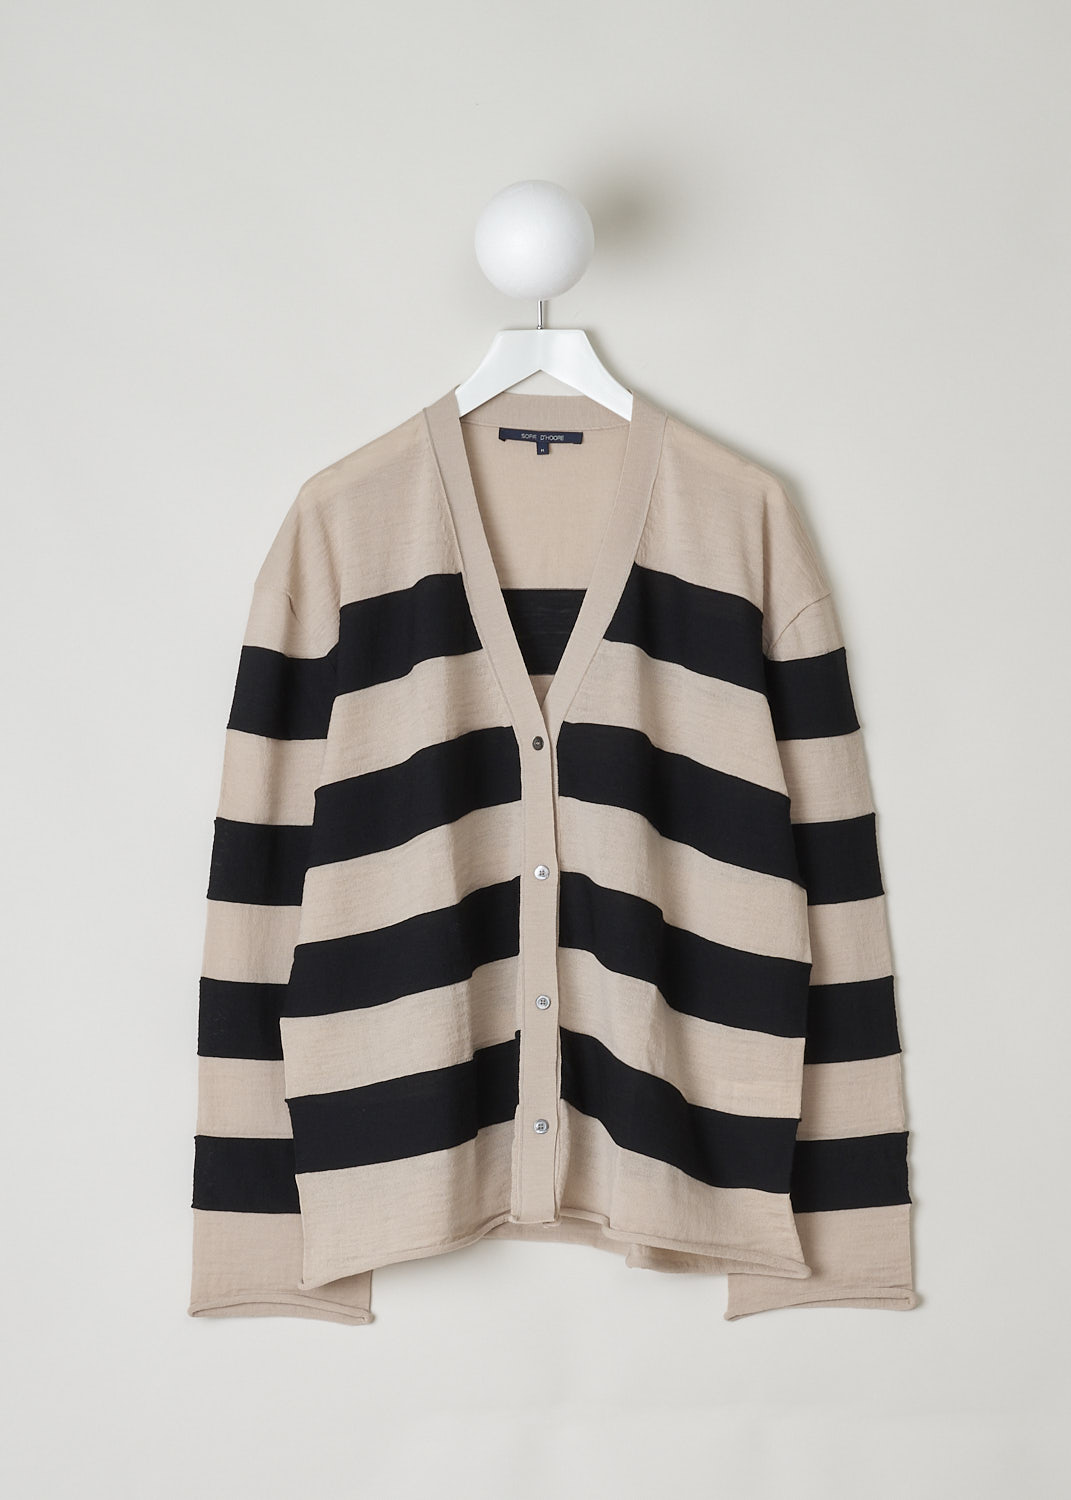 SOFIE D’HOORE, BEIGE AND BLACK STRIPED CARDIGAN, MANIA_YFIMBI_SAAND_BLACK, Beige, Black, Front, This beige and black striped wool cardigan has a V-neckline and a front button closure. The cuffs and hemline have a rolled hemline. The cardigan has a wider silhouette. 
